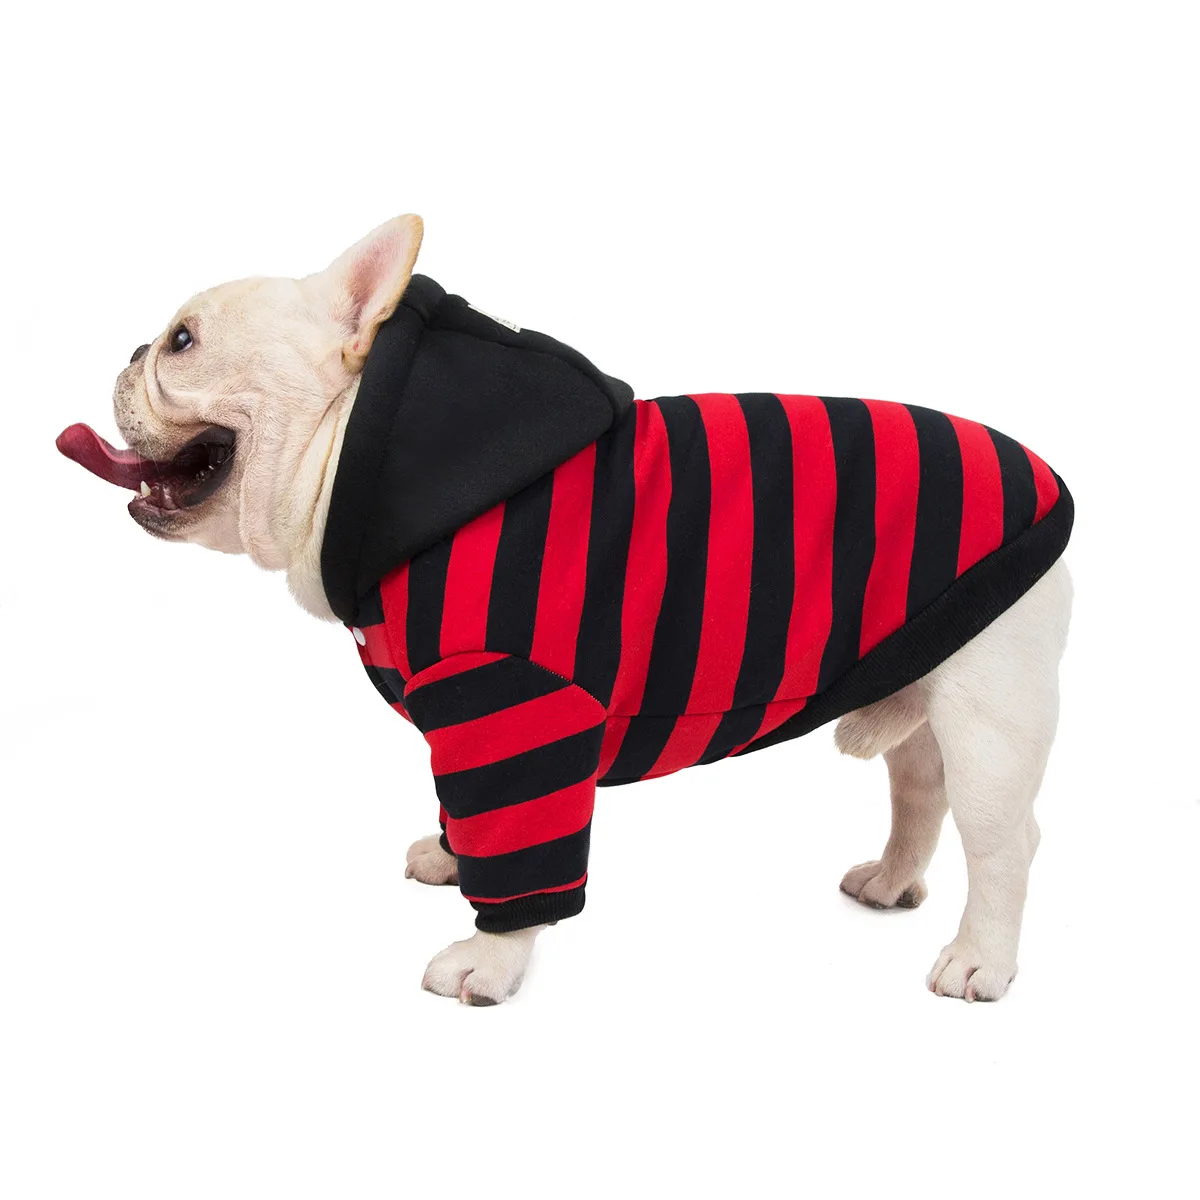 

Classic French Bulldog Outfits Teddy Corgi Pug cotton coat Pet clothes Fall winter dog clothes Puppy Clothing Small dog Clothing